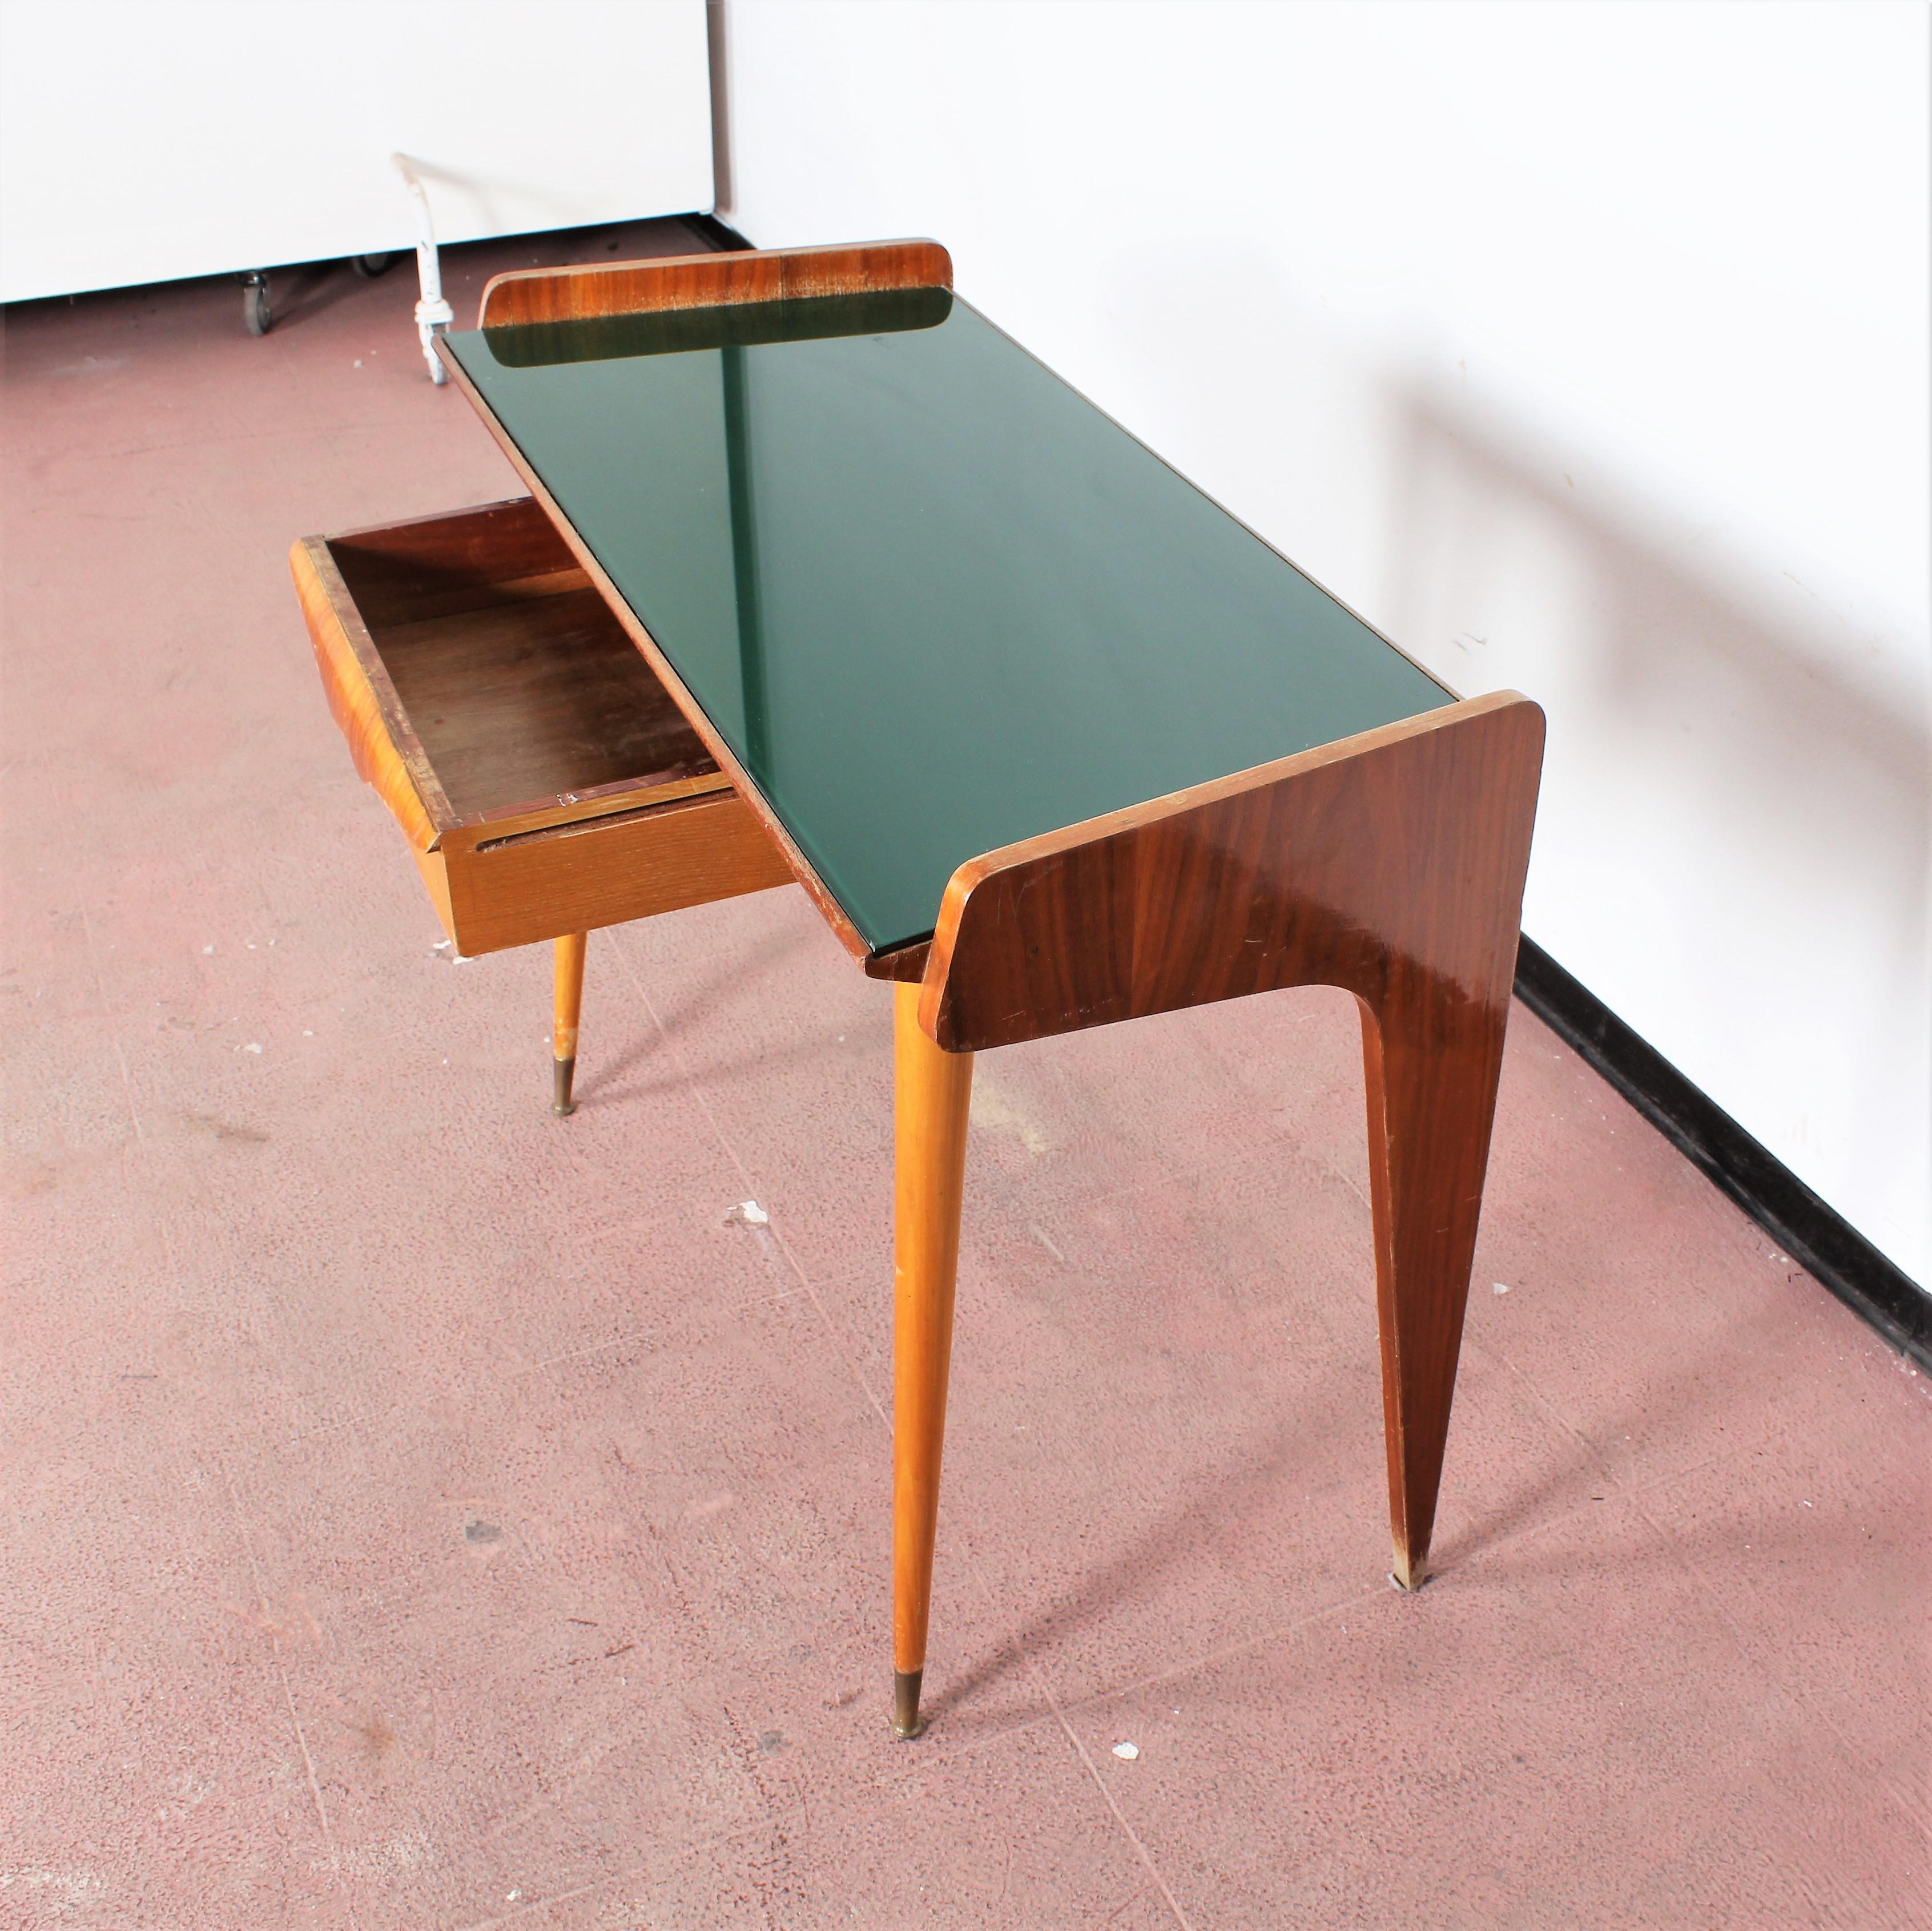 Midcentury Gio Ponti Maple Wood Console with Green Glass, Italy, 1950s 2